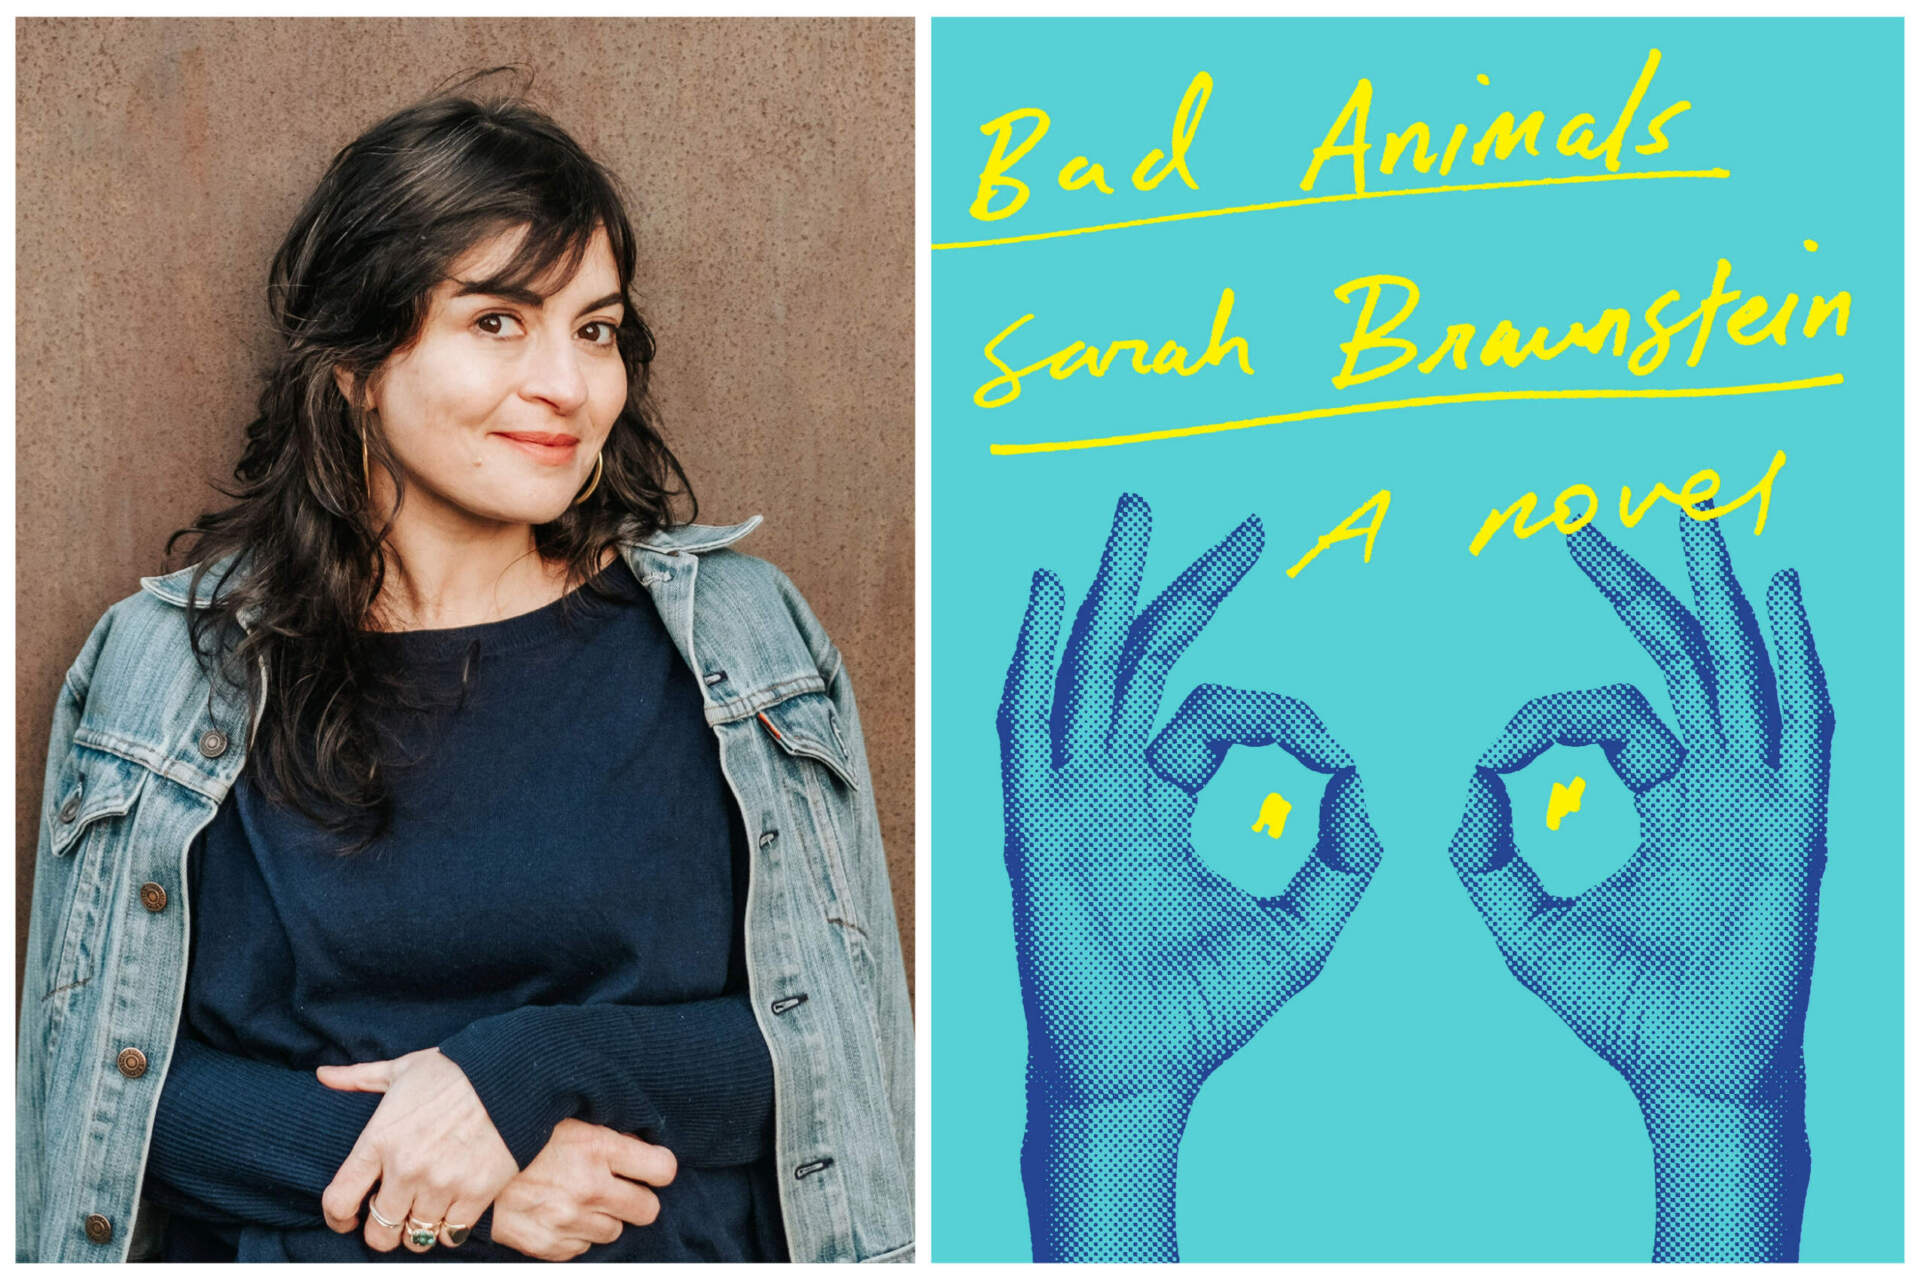 Author Sarah Braunstein's novel &quot;Bad Animals&quot; is out now. (Author photo courtesy Lauryn Hottinger; book cover courtesy W. W. Norton &amp; Company)